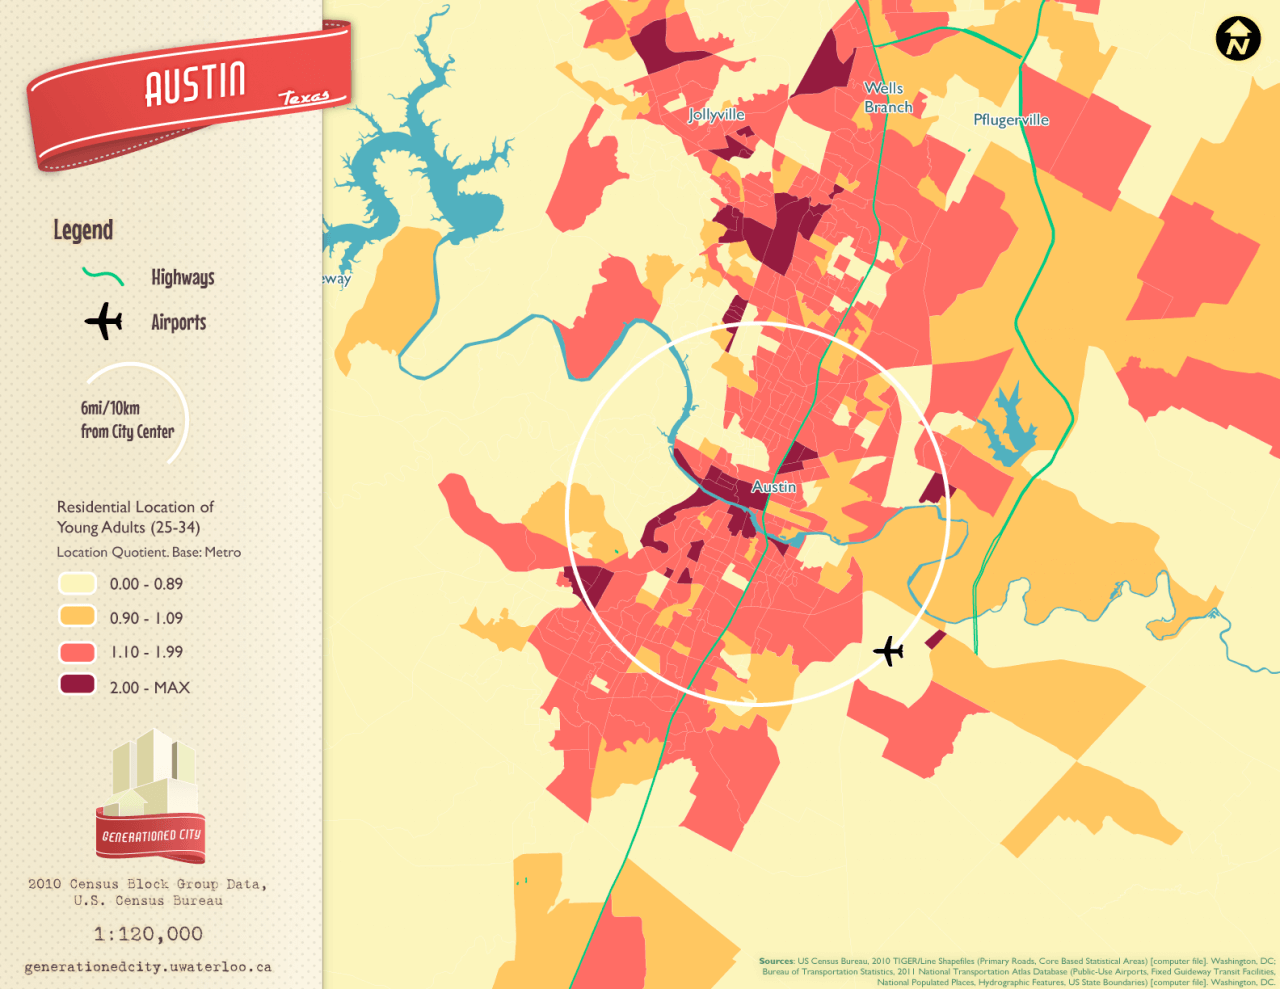 Residential location of young adults in Austin.